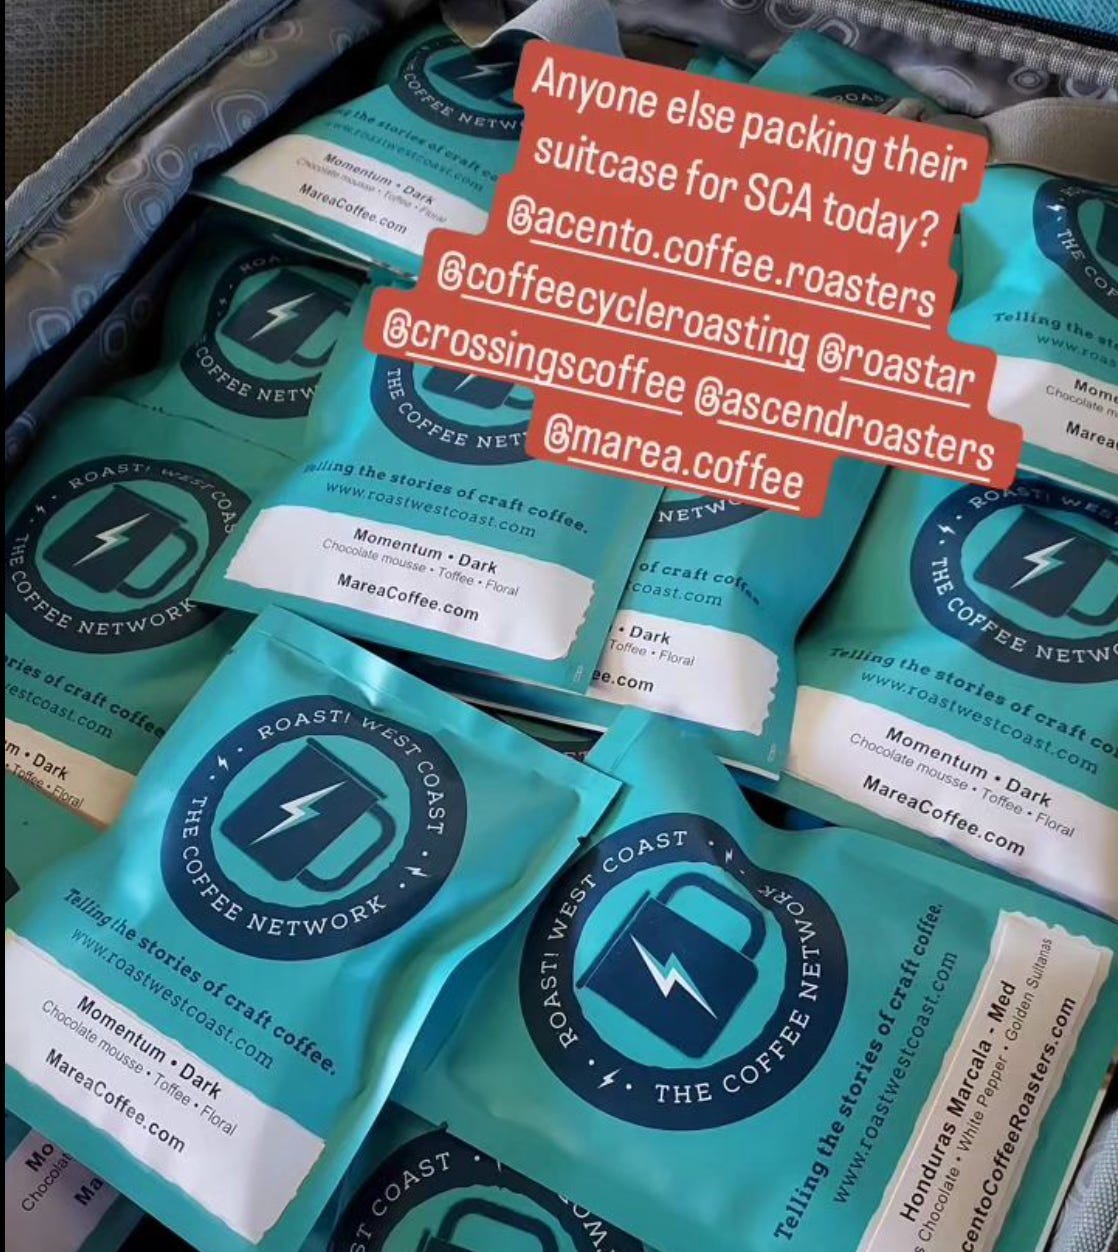 Sample packages of coffee a stacked in a backpack featuring a teal background and the dark blue coffee mug with a lightning bolt logo of Roast! West Coast